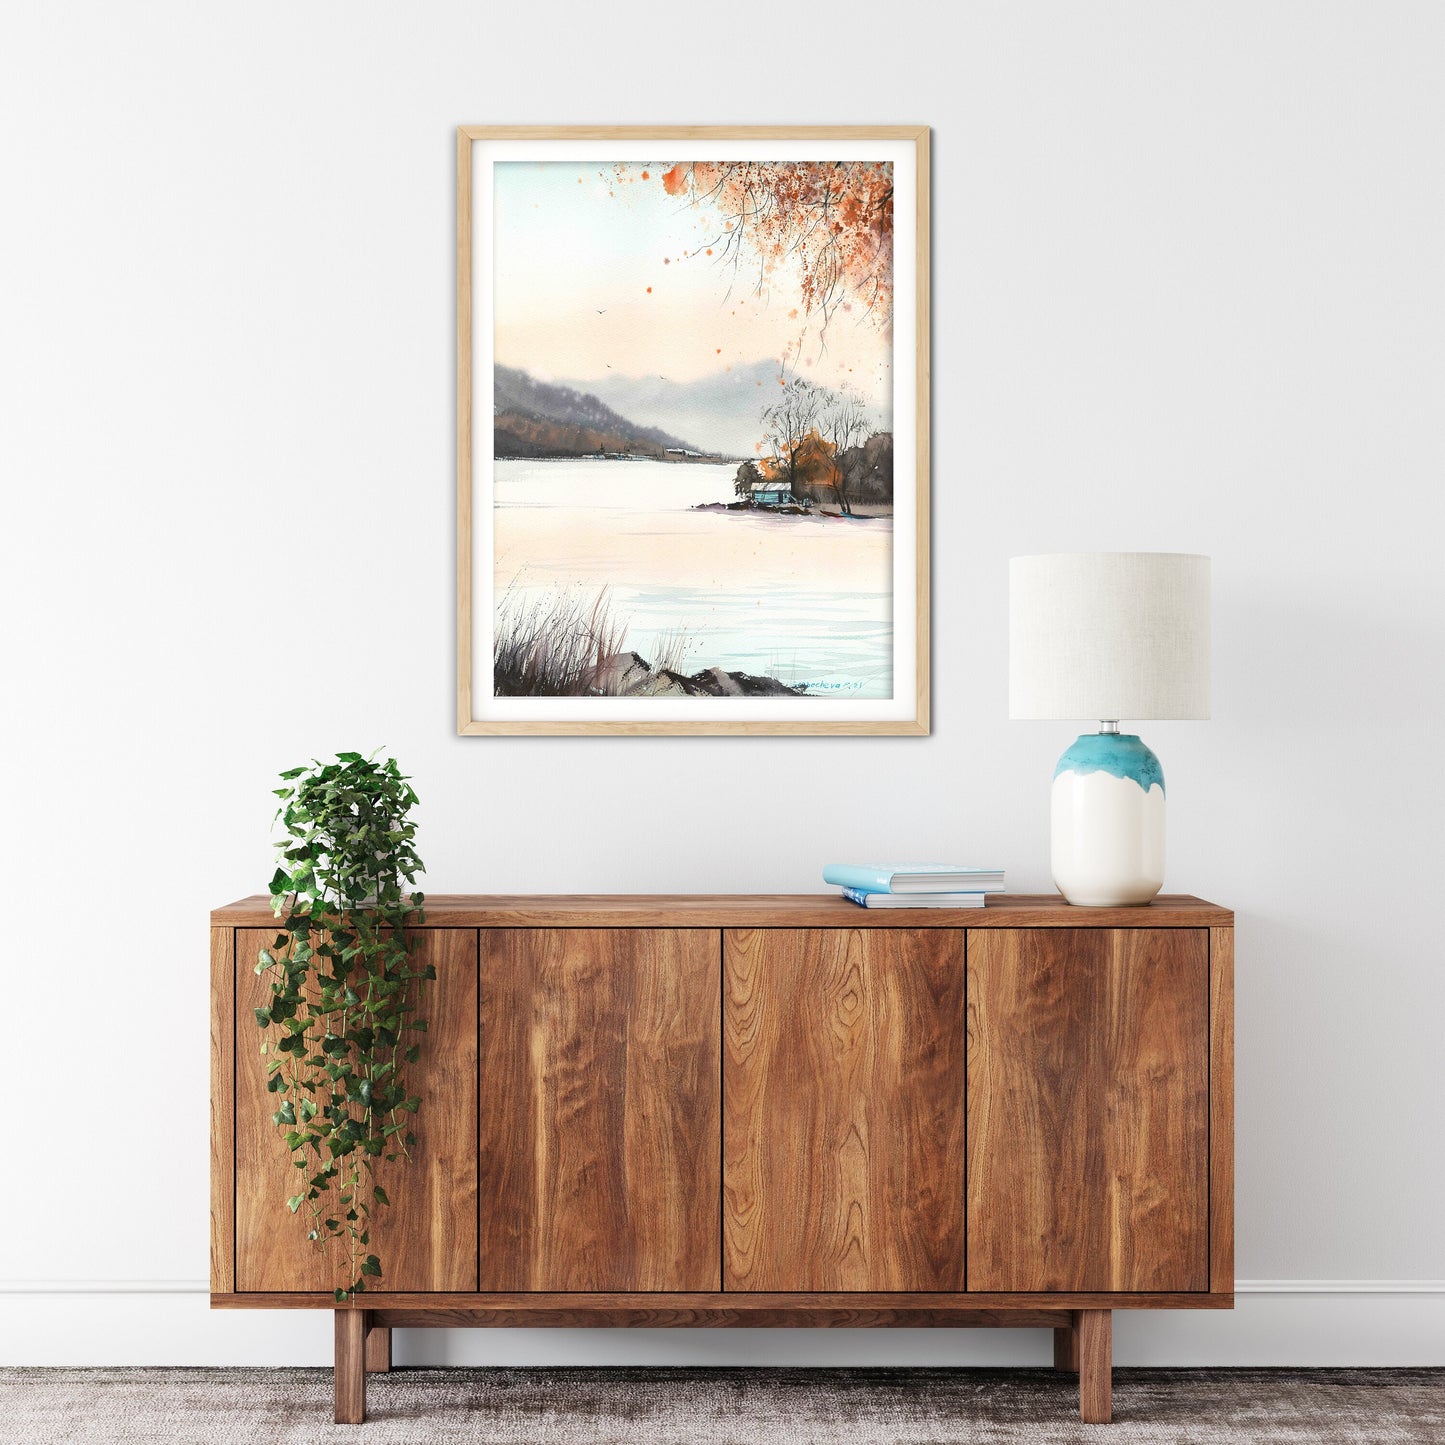 Fall Mountain Art, Nature Giclee Print, Abstract Wall Decor, Landscape Painting on Canvas, Fine Art Print